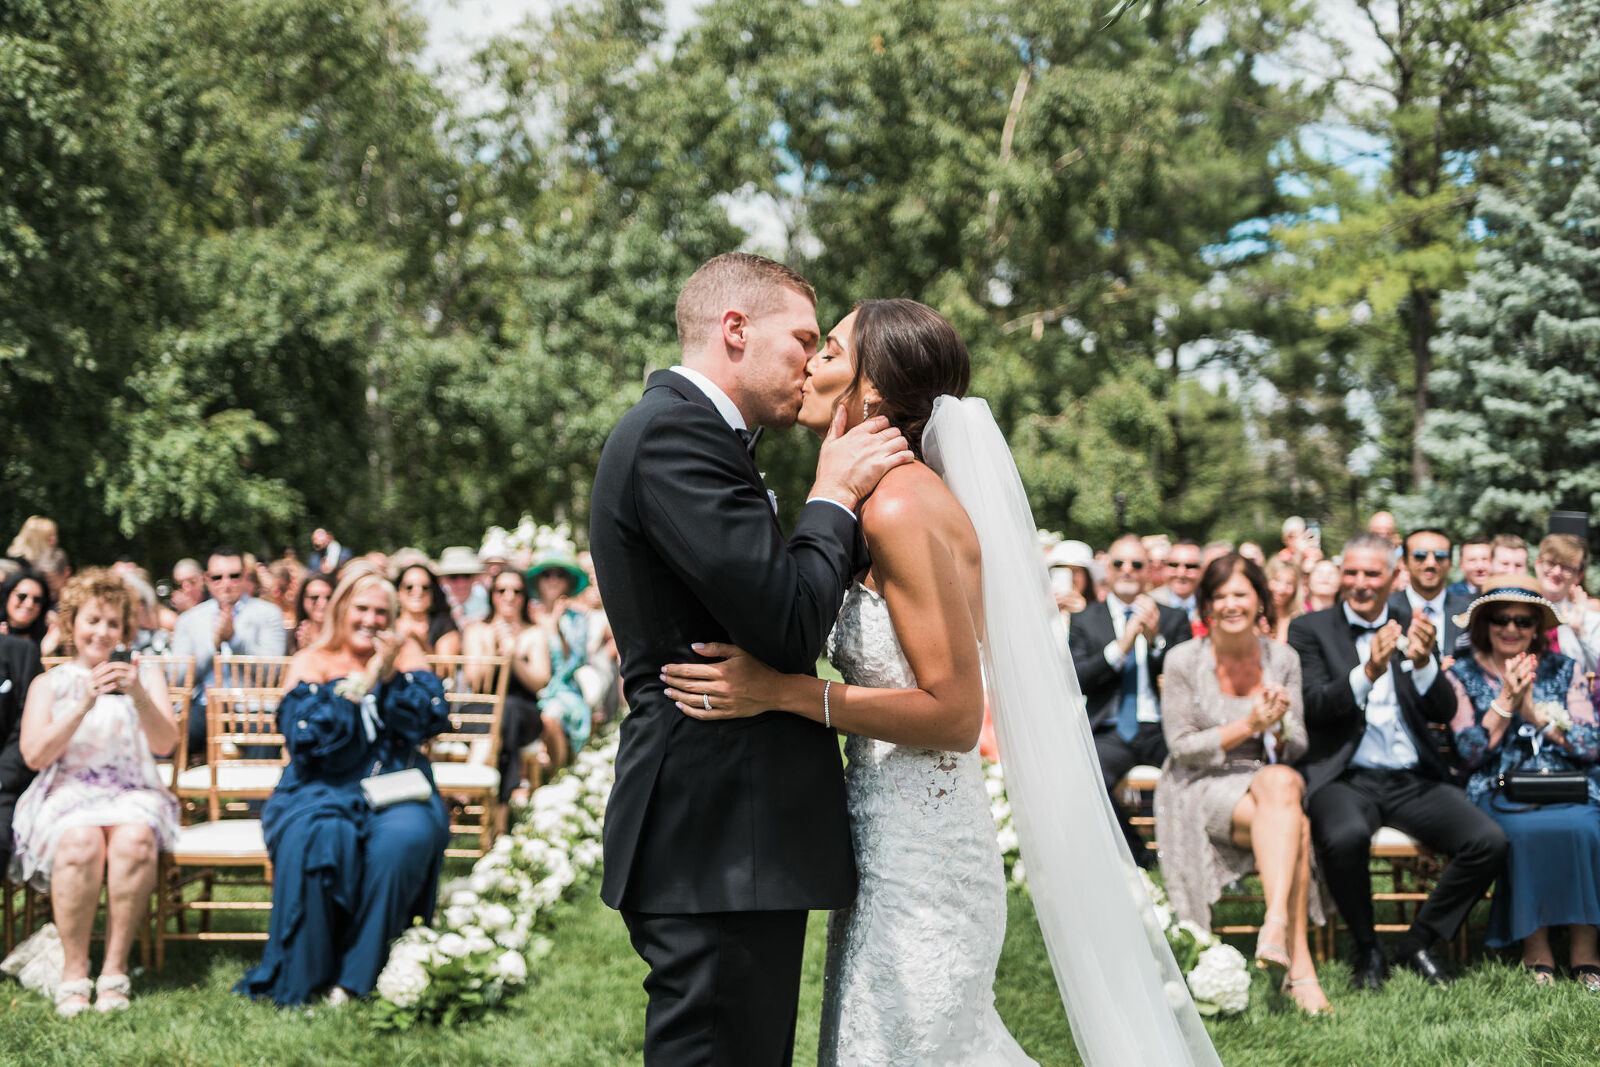 Bride and groom kiss after saying I do on their wedding day with guests all behind them